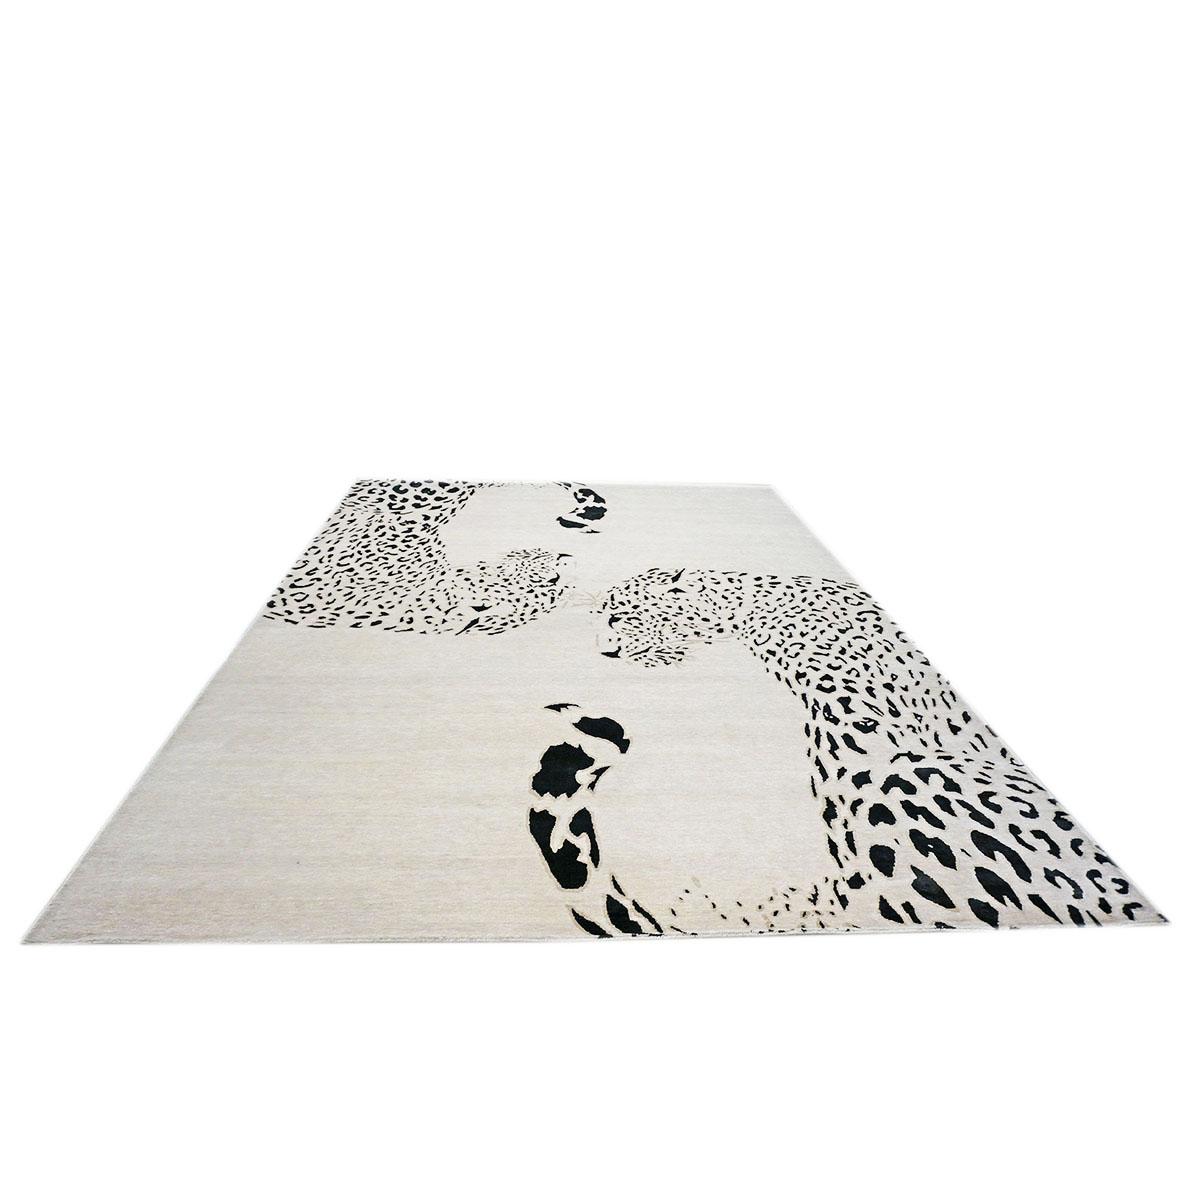 Ashly Fine Rugs presents a New Modern Inspired Wool & Silk 9x14 Ivory & Black Jaguar Handmade Area rug with lustrous shiny fibers and a thick durable pile. This gorgeous collection has been designed by our in-house designer and handmade by the